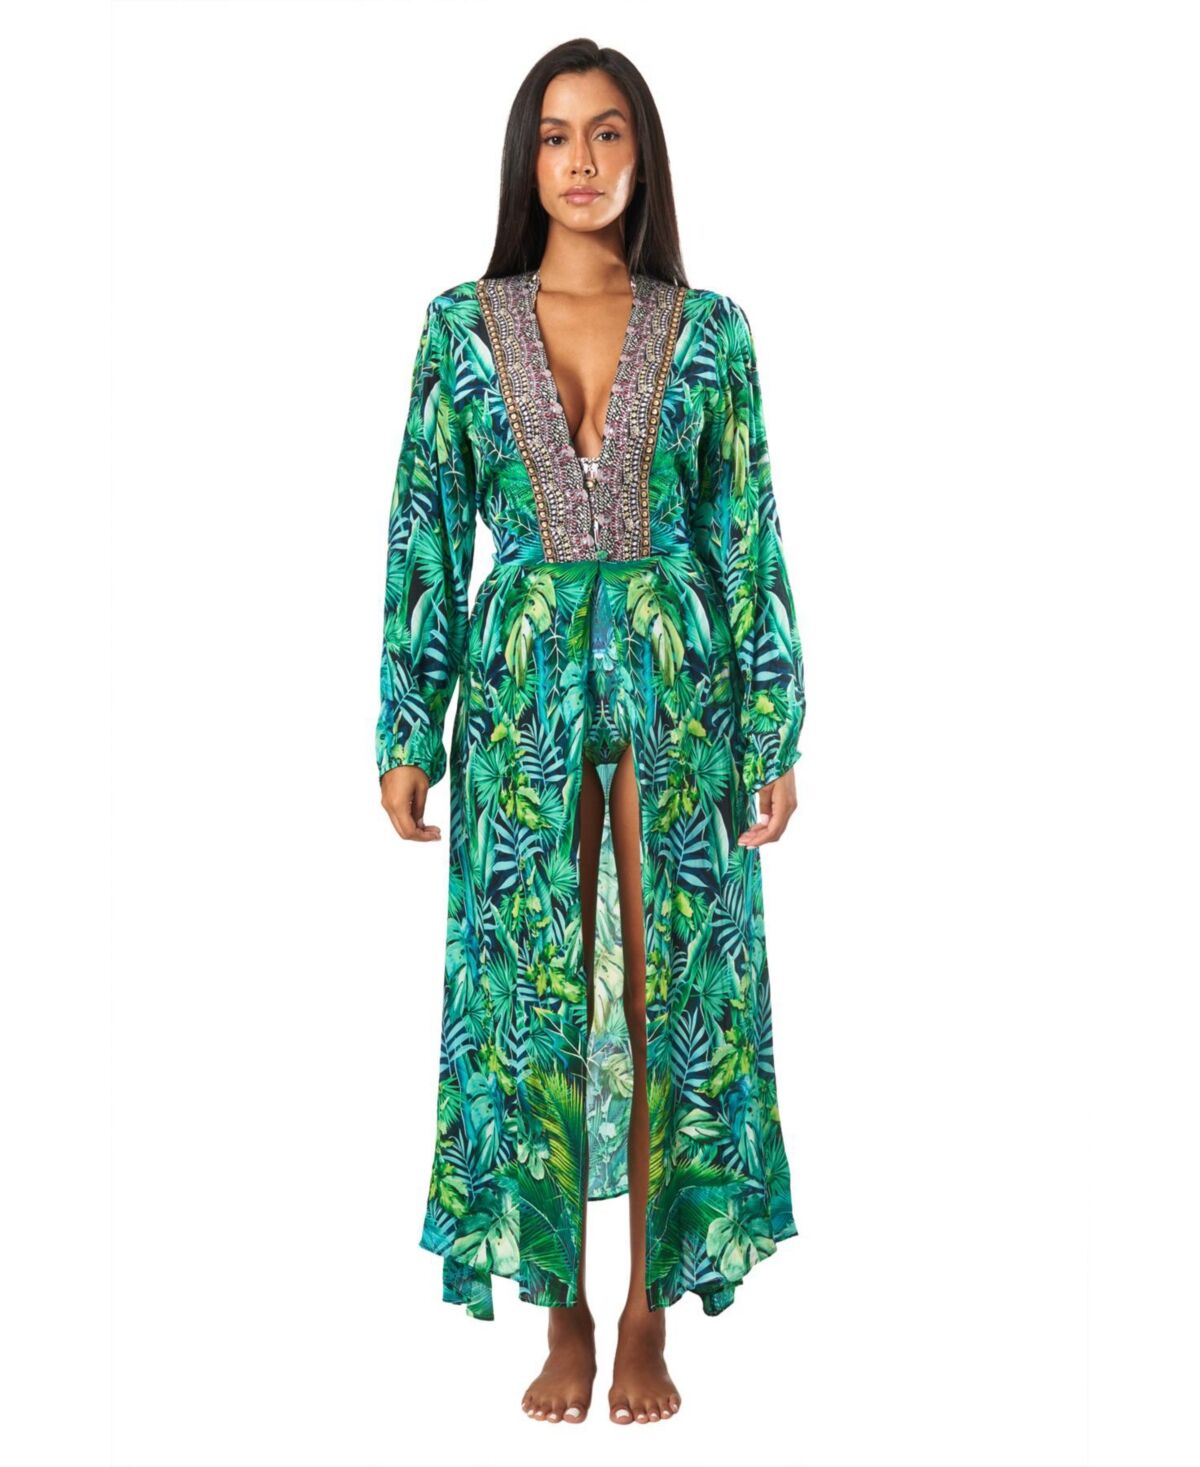 La Moda Clothing Maxi belted cover up - Green